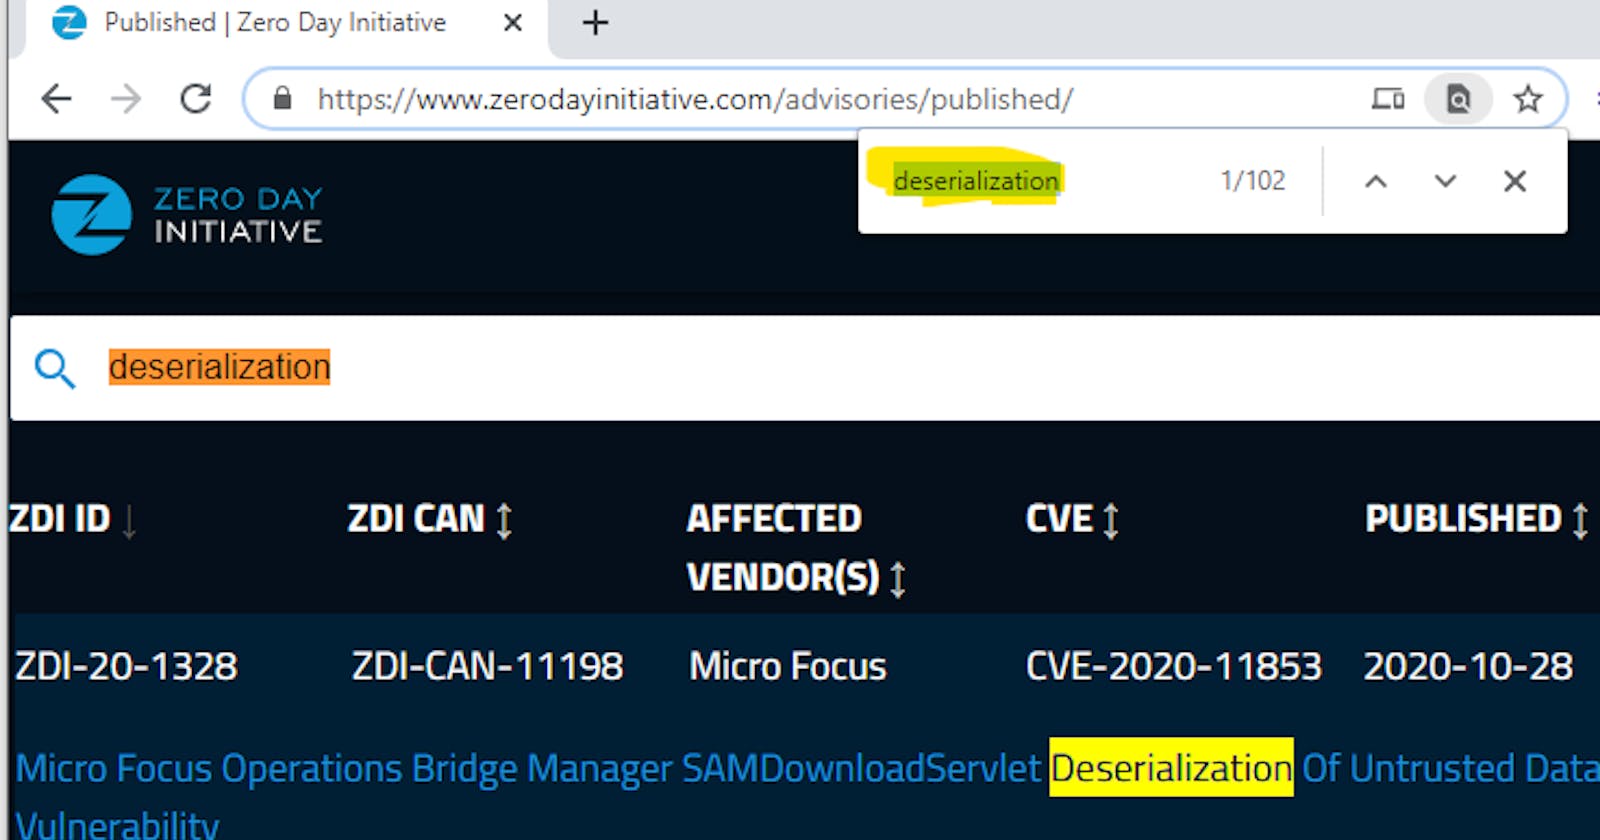 (0.5 day) Micro Focus Operations Bridge Manager Pre-Auth Deserialization to RCE